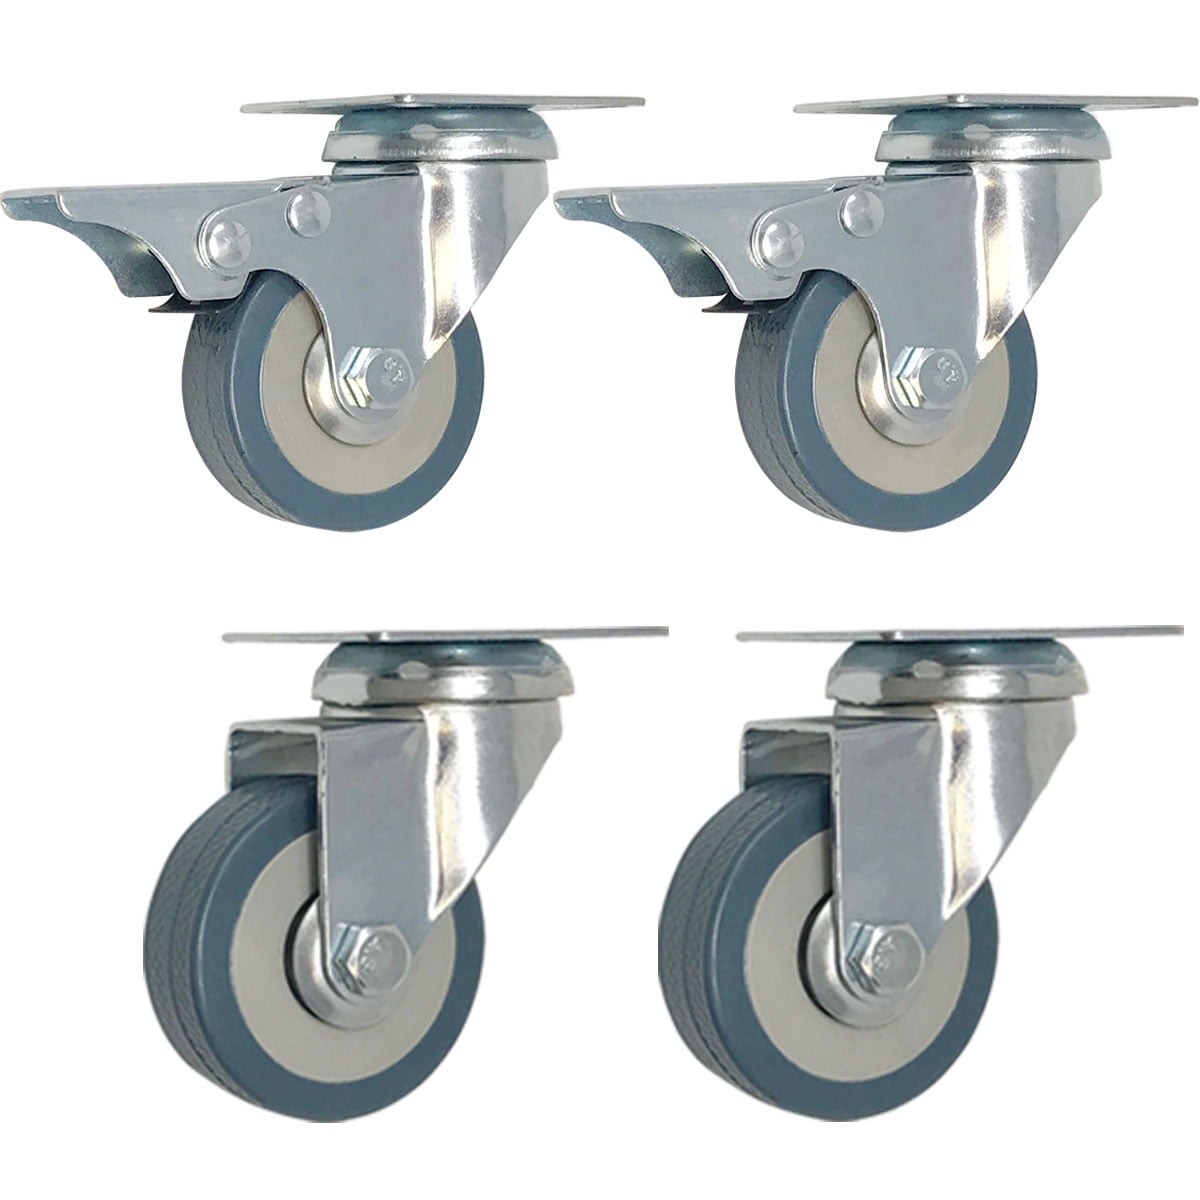 Skelang 2 Top Plate TPE Caster Low Profile Swivel Plate Caster with Brake Table TV Stand Pack of 4 Silent Caster Wheels for Crib Total Loading Capacity 230 Lbs Per Wheel Shelf